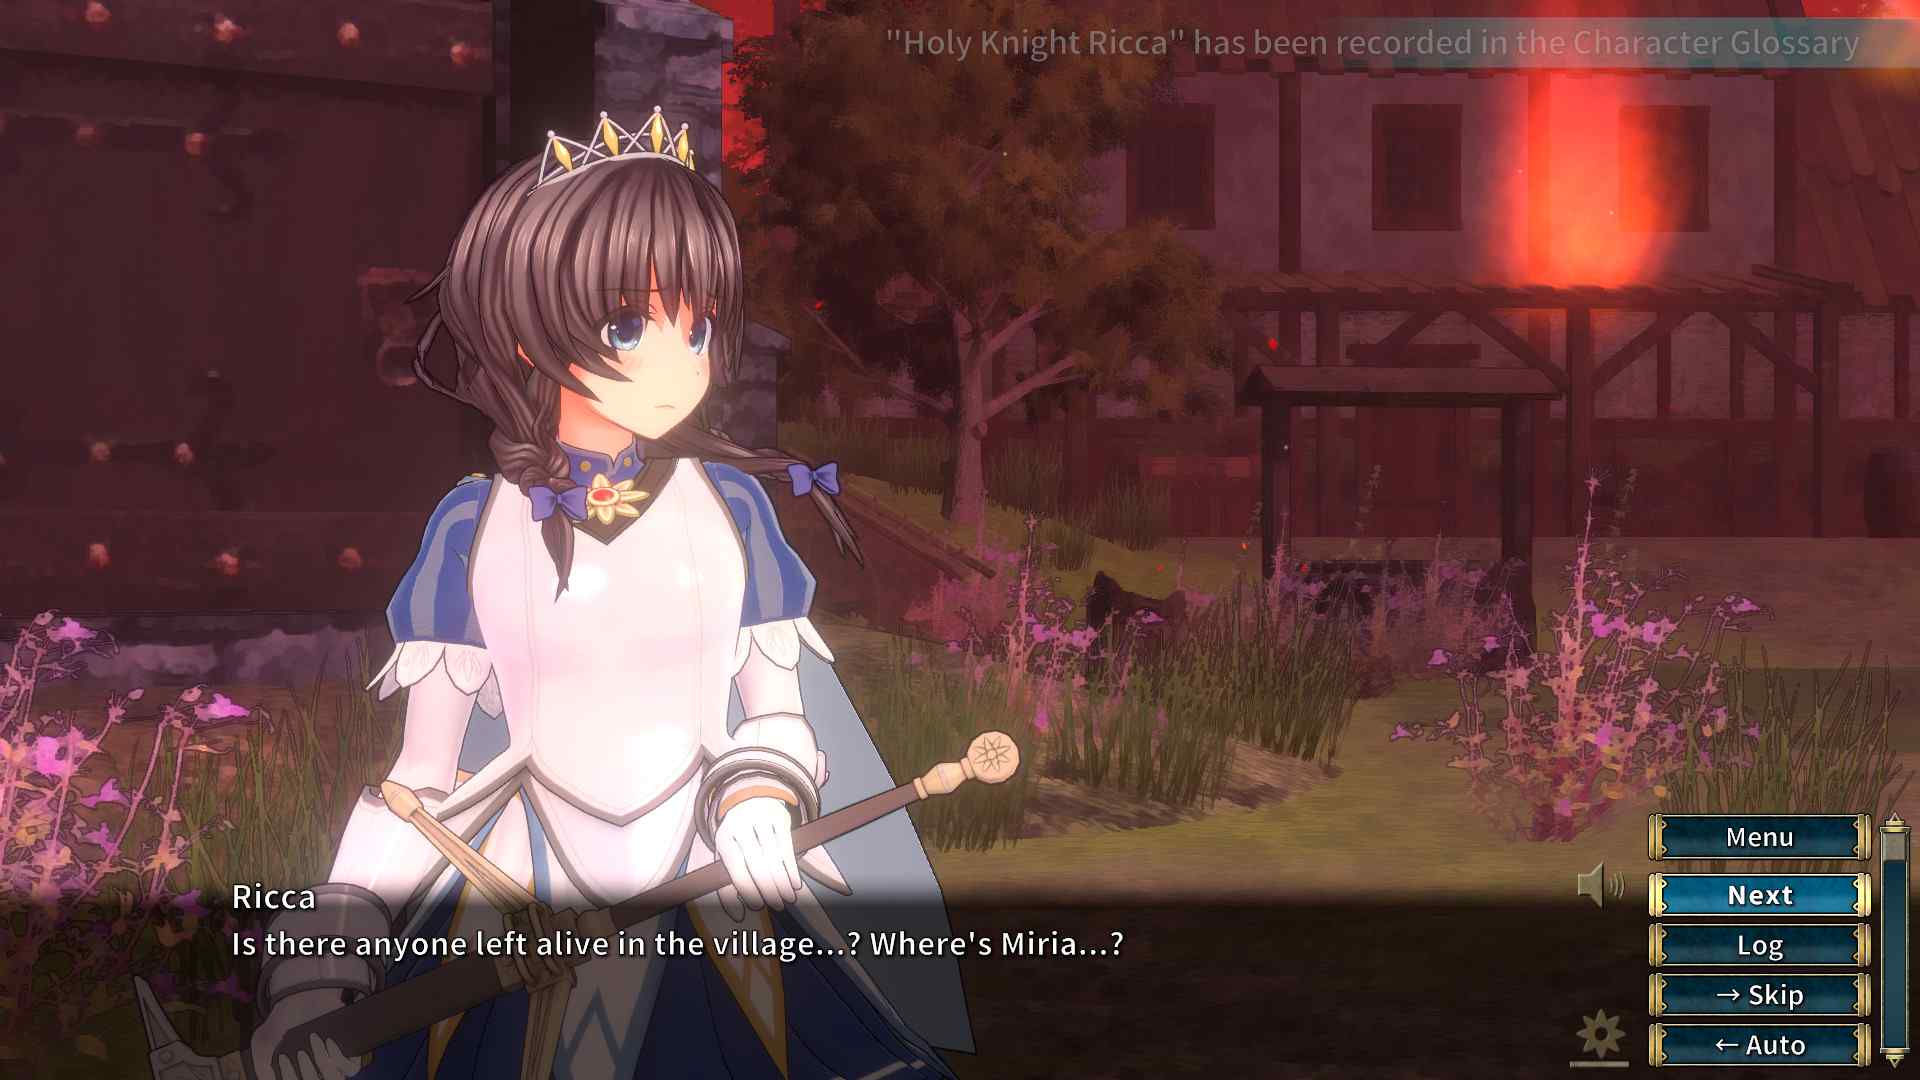 The Fairy Tale of Holy Knight Ricca: Two Winged Sisters [v1.1.8]